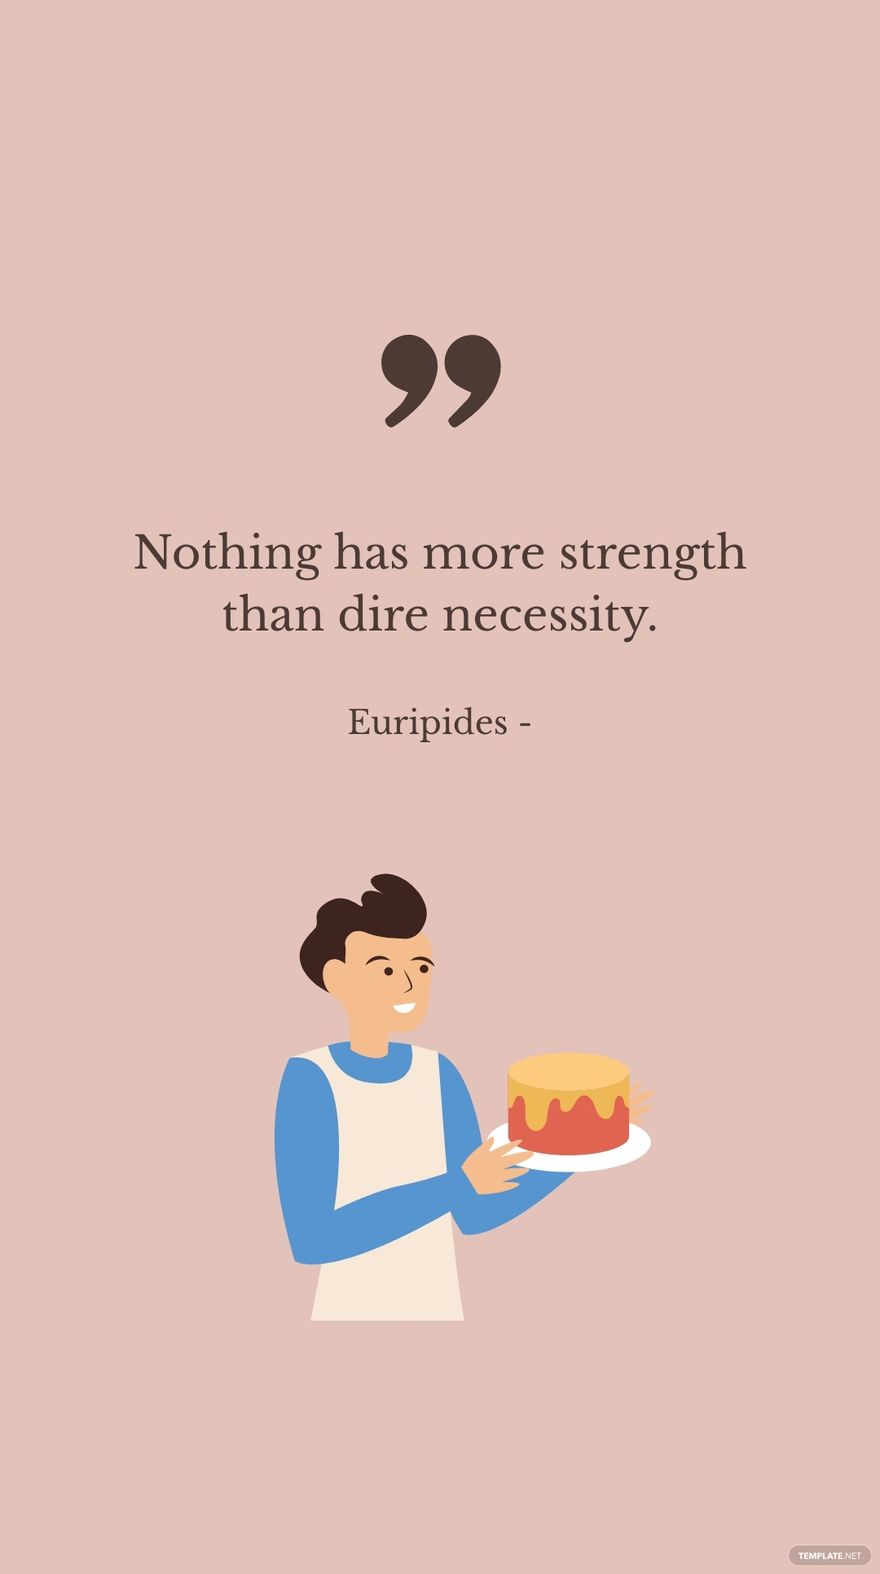 Free Euripides - Nothing has more strength than dire necessity. in JPG